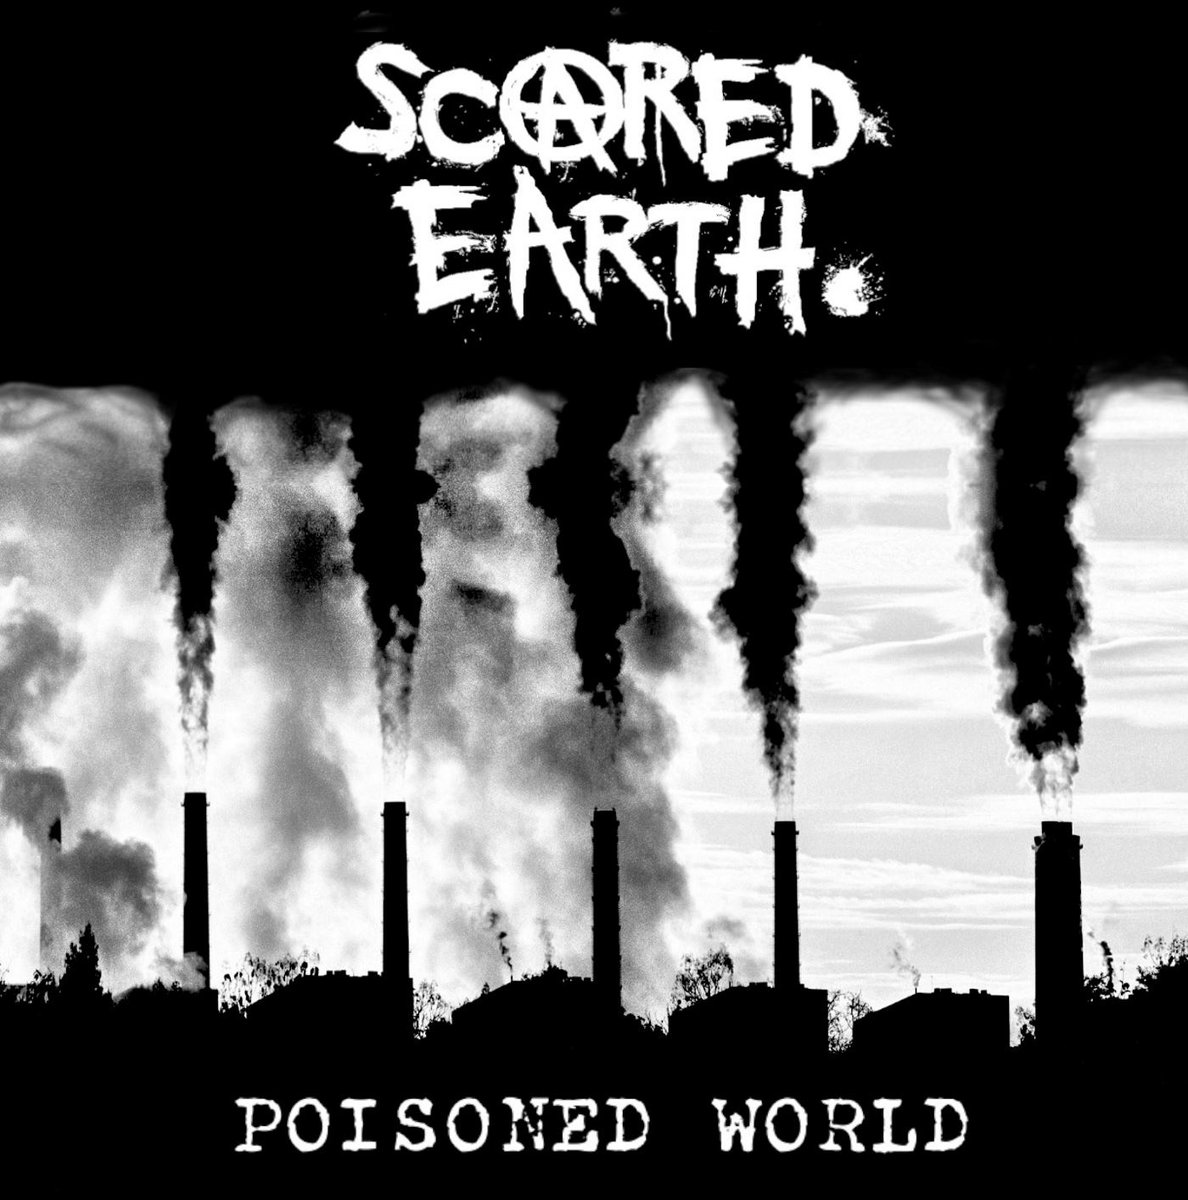 SCARED EARTH - Poisoned world